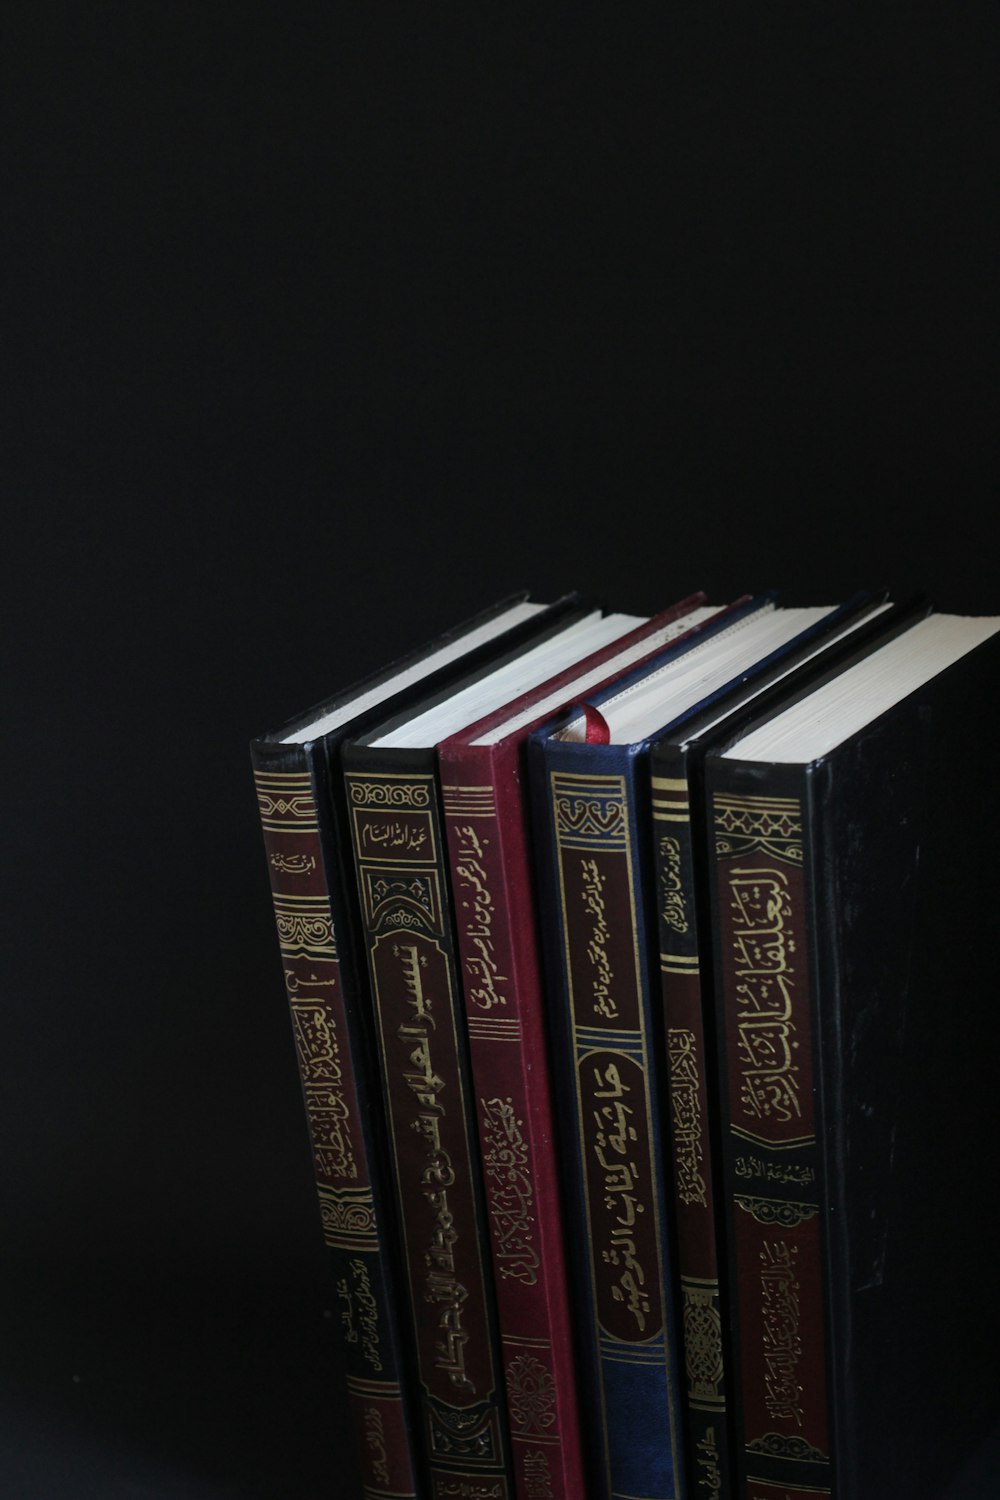 piled books on black surface